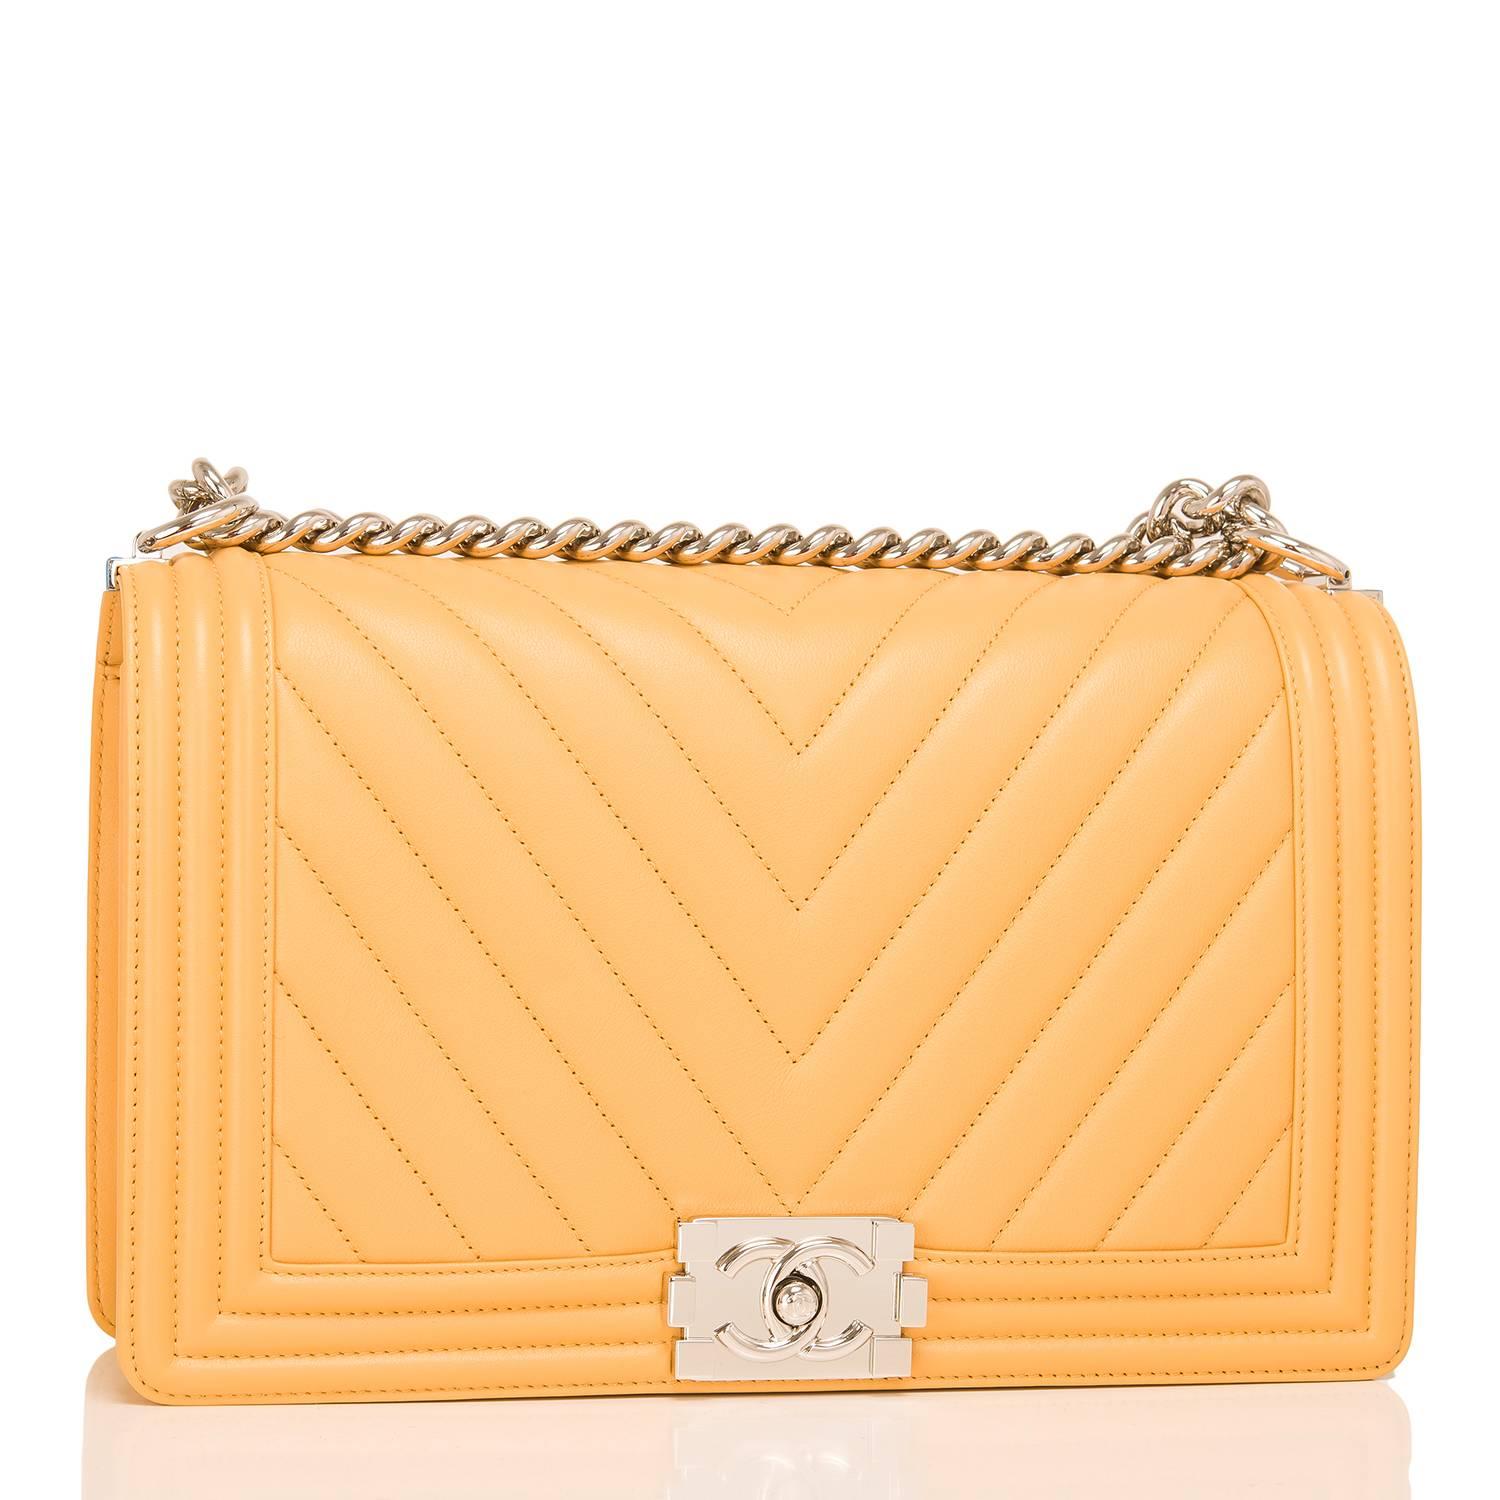 Chanel New Medium Boy bag of yellow chevron lambskin leather with silver tone hardware.

This bag features a full front flap with the Le Boy CC push lock closure and a silver tone chain link and yellow leather padded shoulder/crossbody